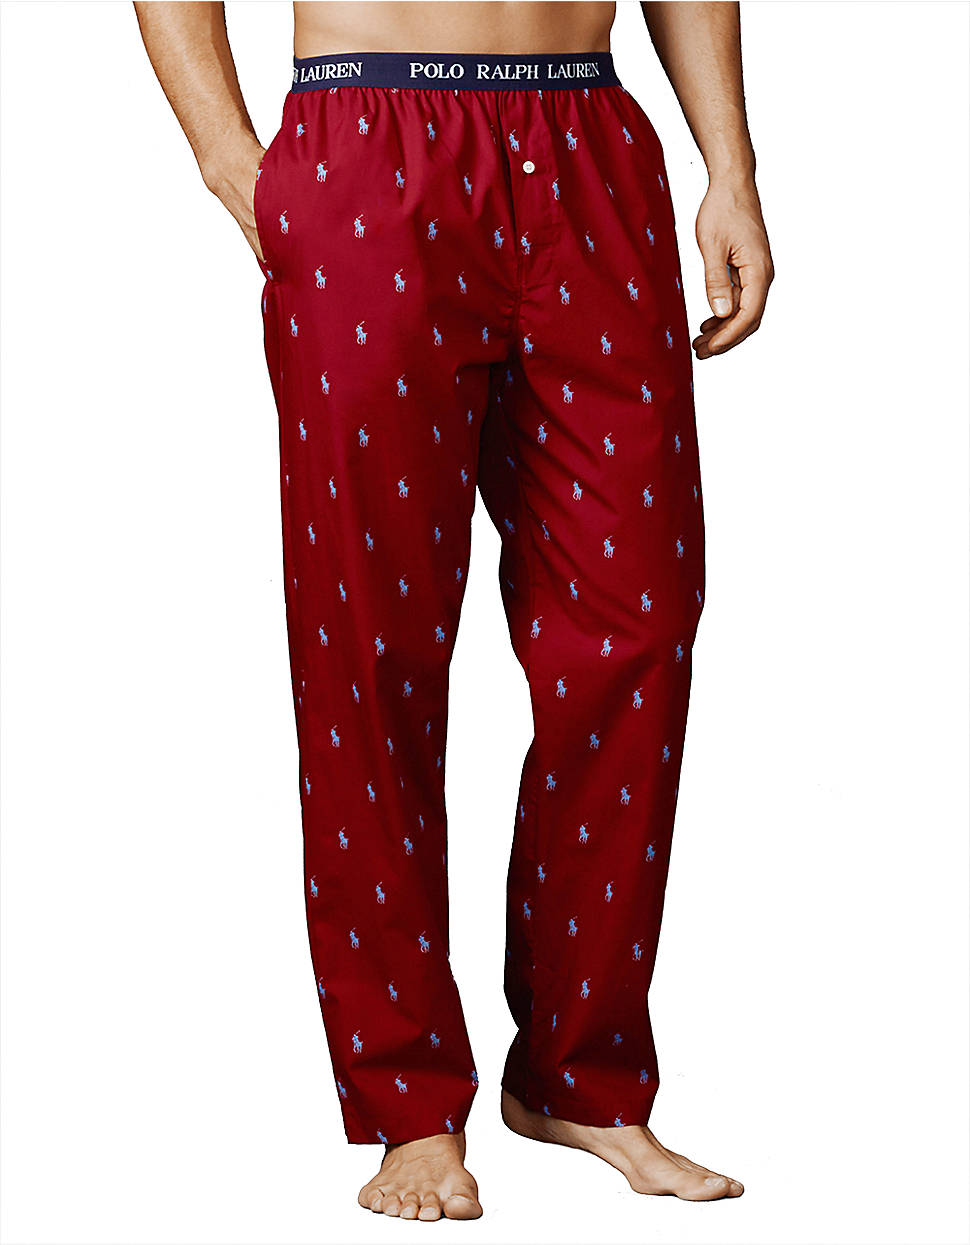 Lyst - Polo Ralph Lauren Pony-print Woven Pajama Pants in Red for Men